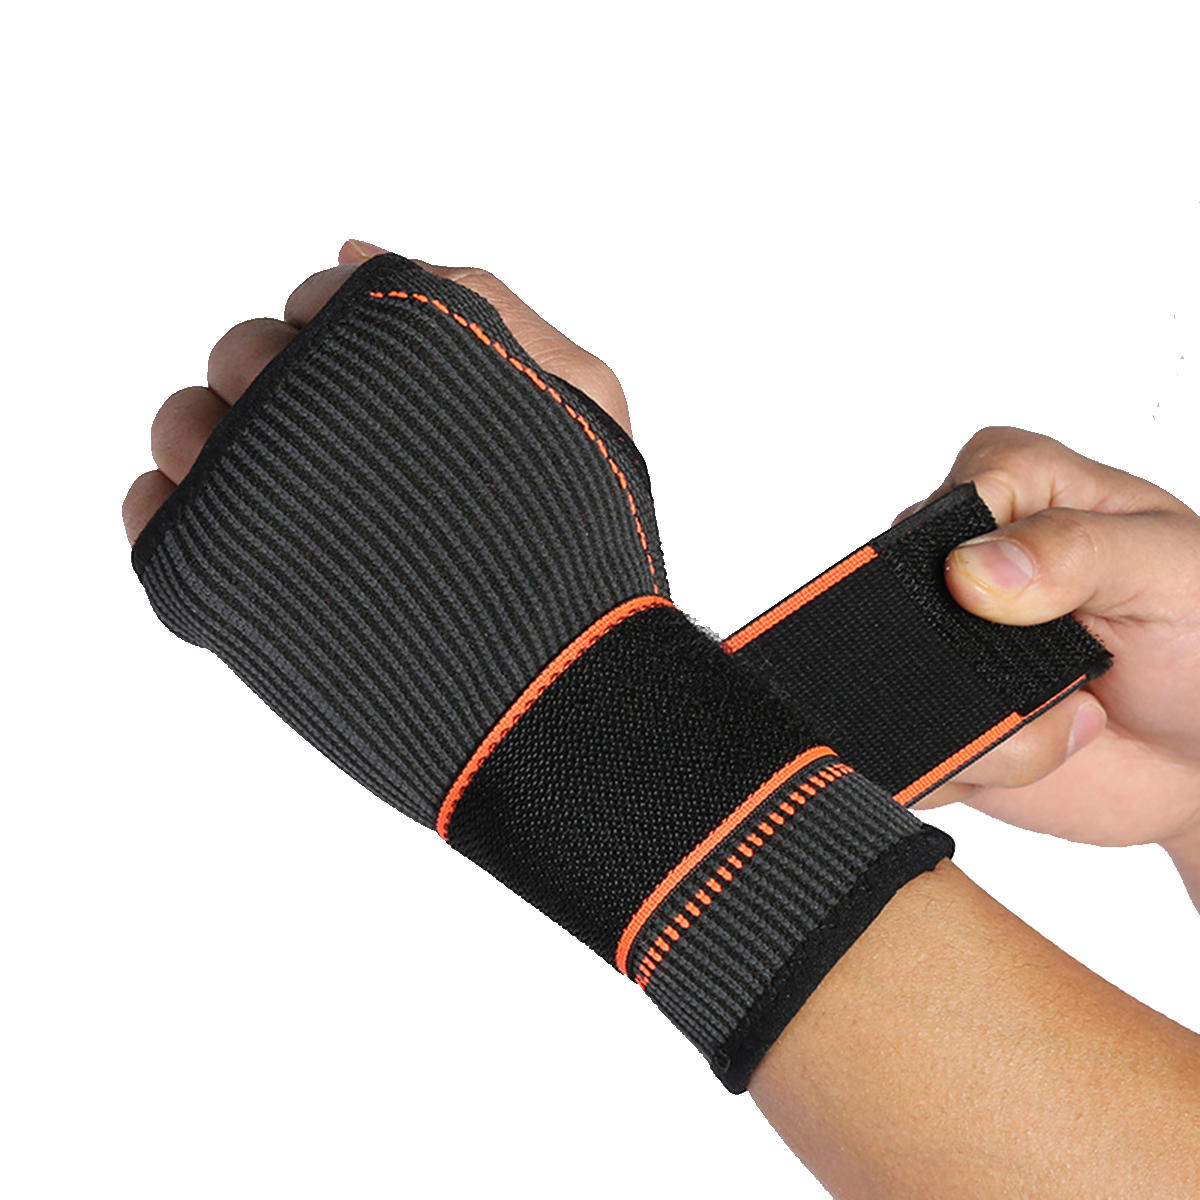 1Pc Adjustable Wrist Support Camping Sports Hand Palm Brace Strap Wraps Hand Prevent Sprains